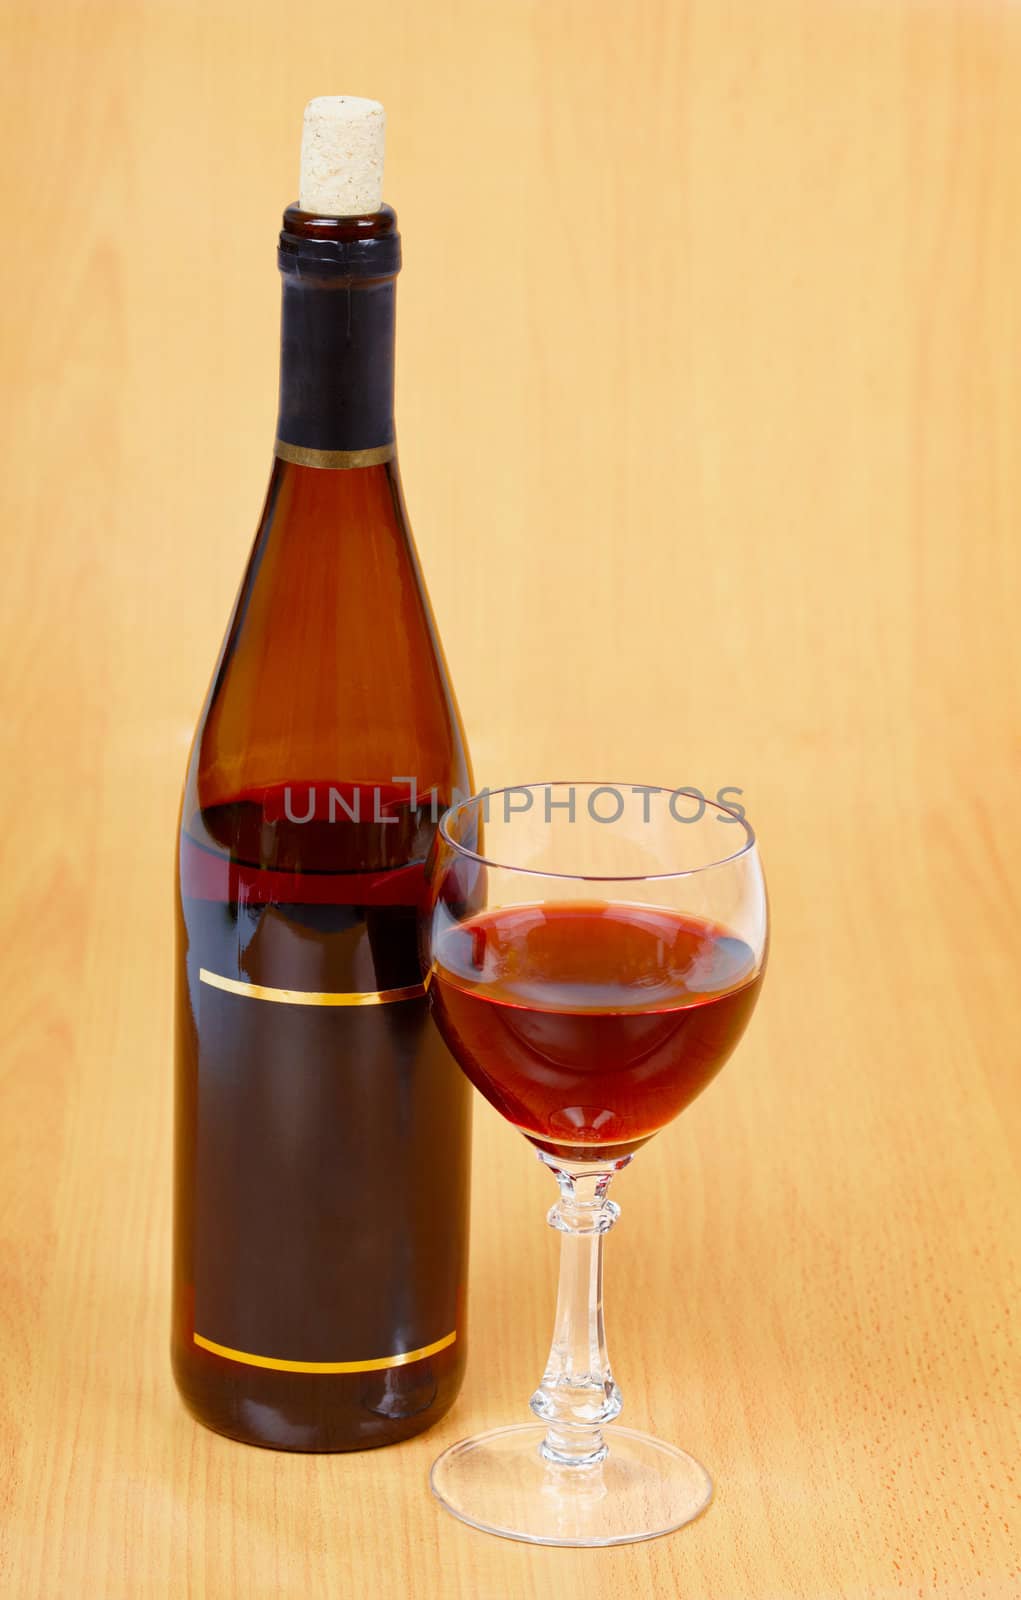 A bottle of red wine and a glass on a wooden table